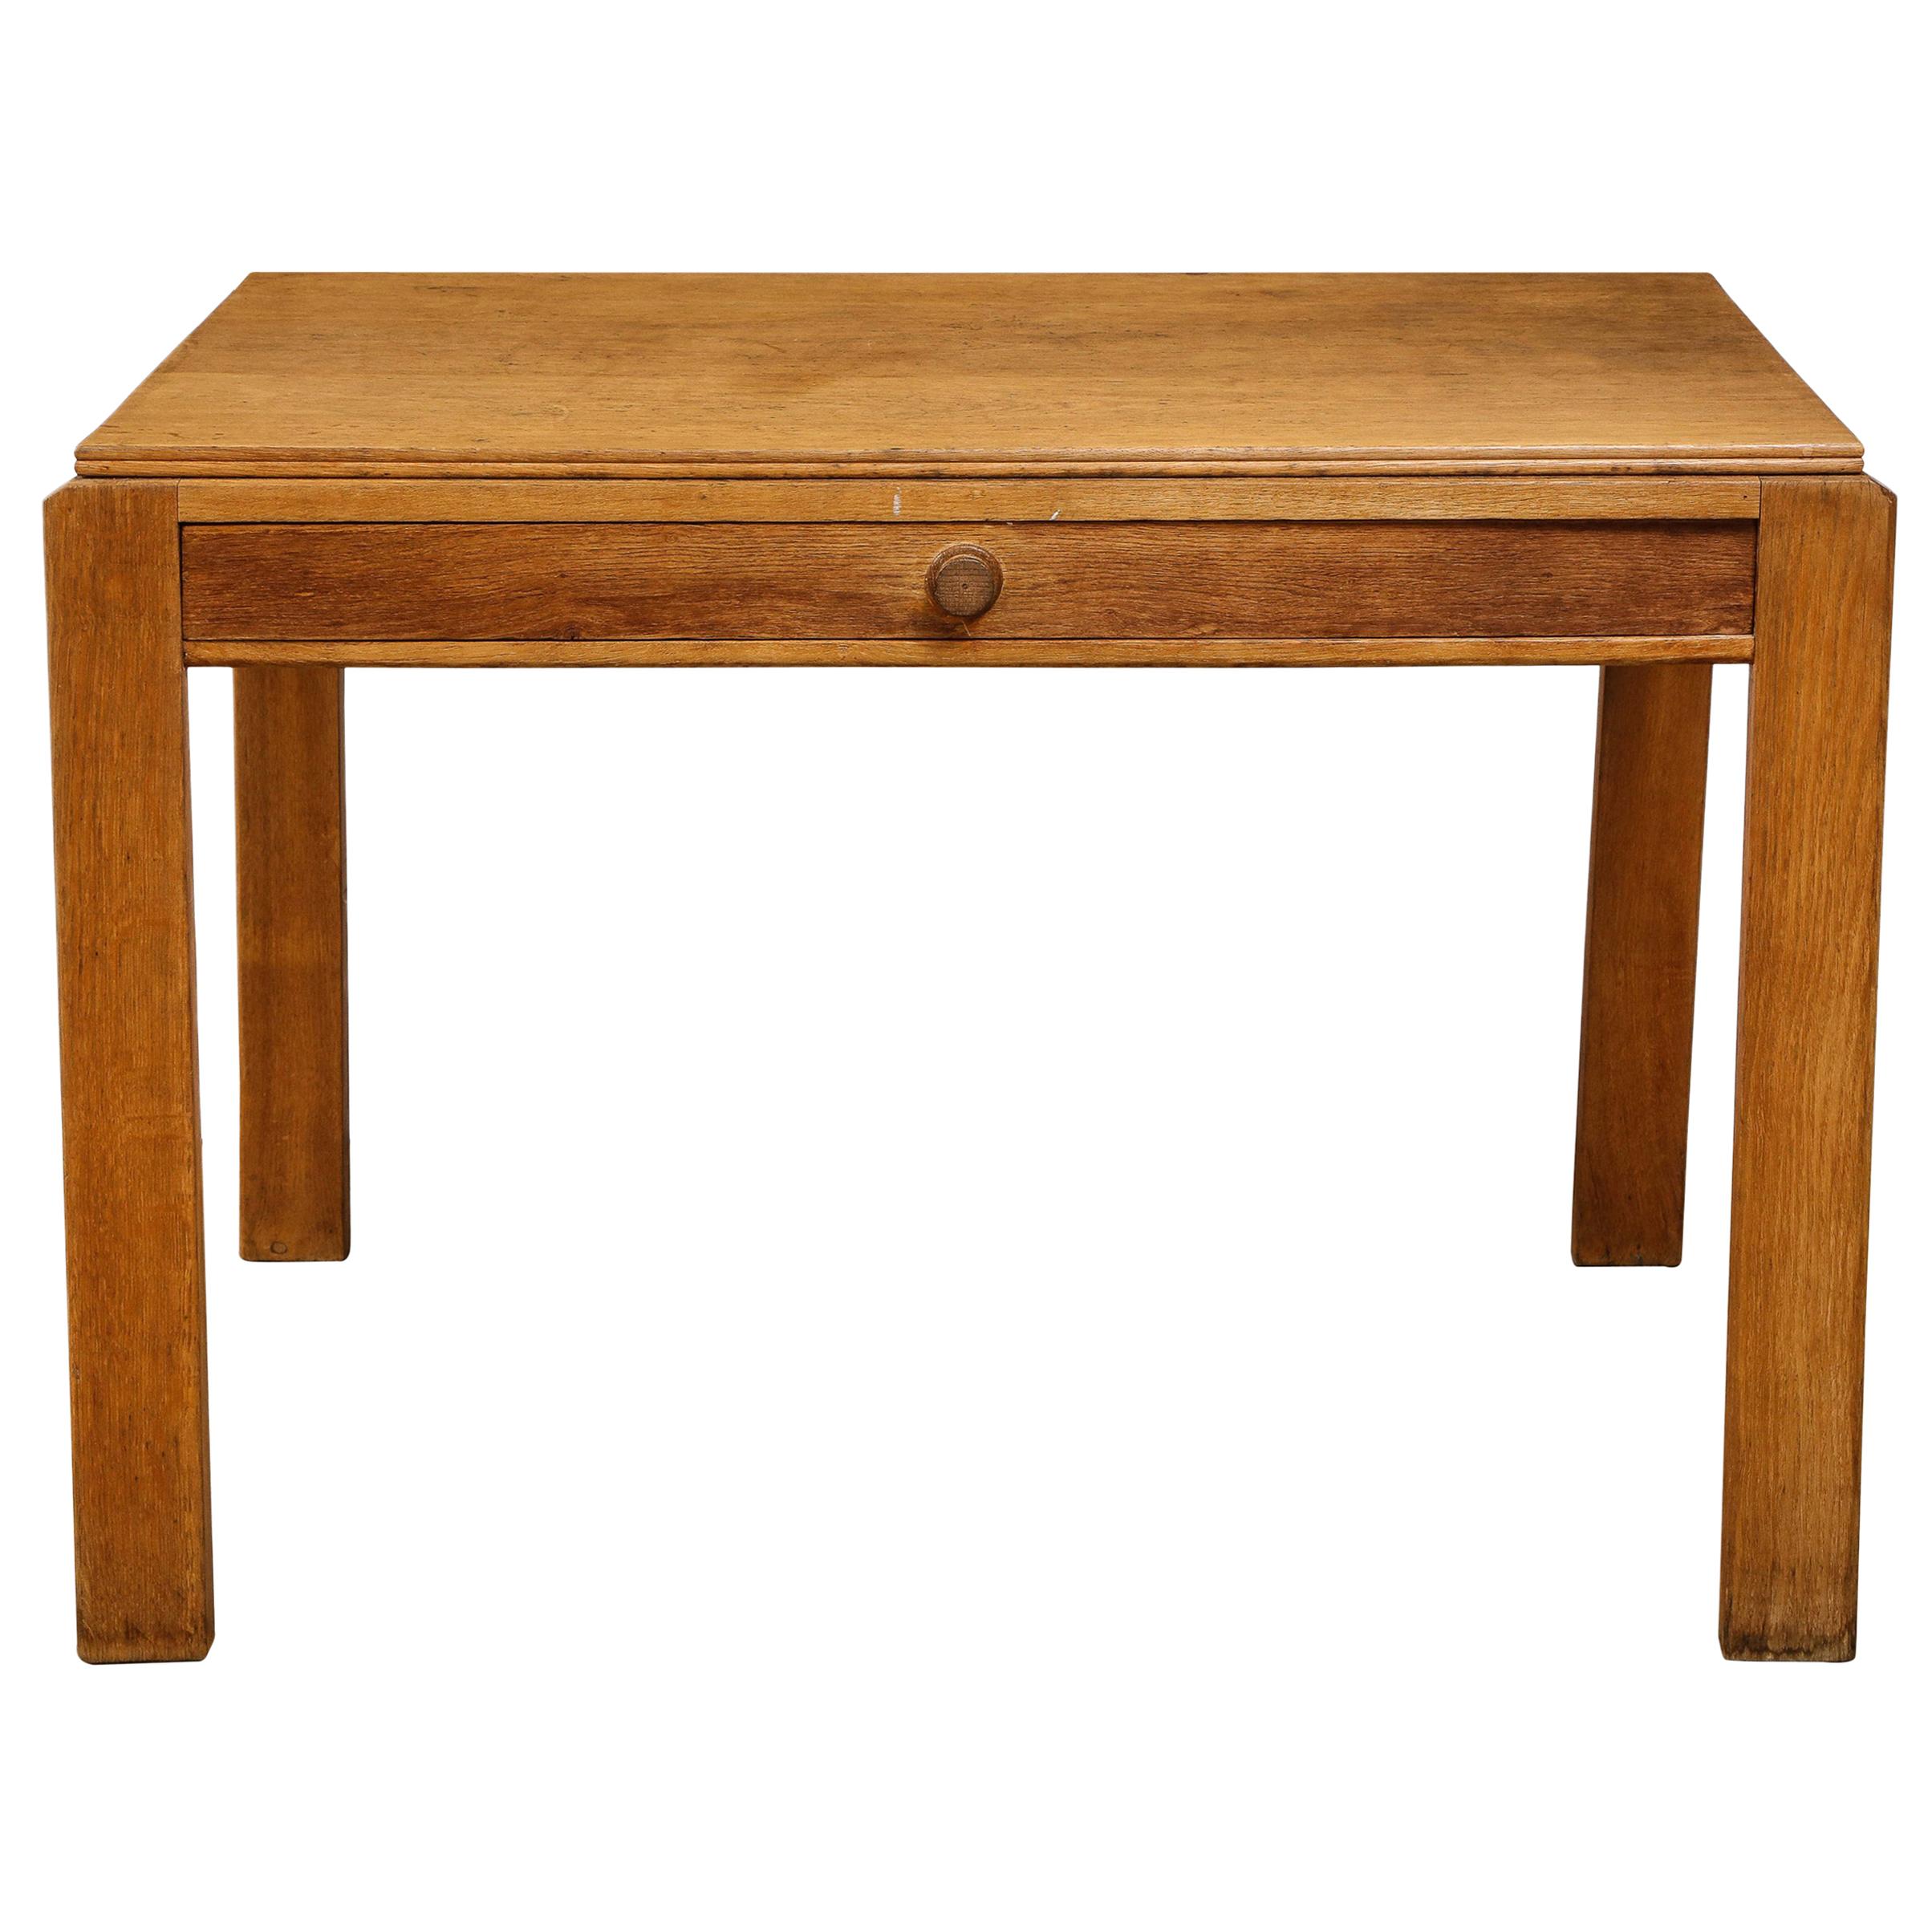 Vintage French Oak Table with Drawer Signed Mercier & Chaleyssin, circa 1940s